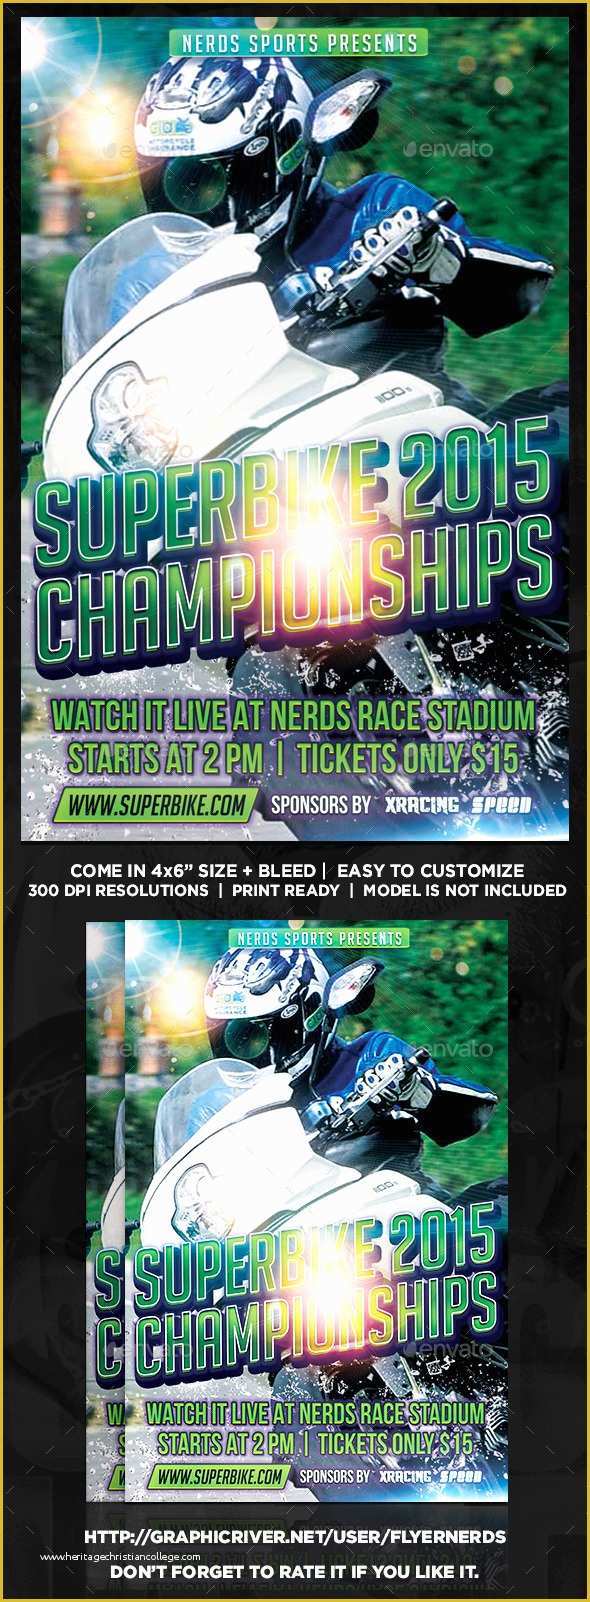 Bike Night Flyer Template Free Of Graphicriver Superbike 2015 Championships Sports Flyer